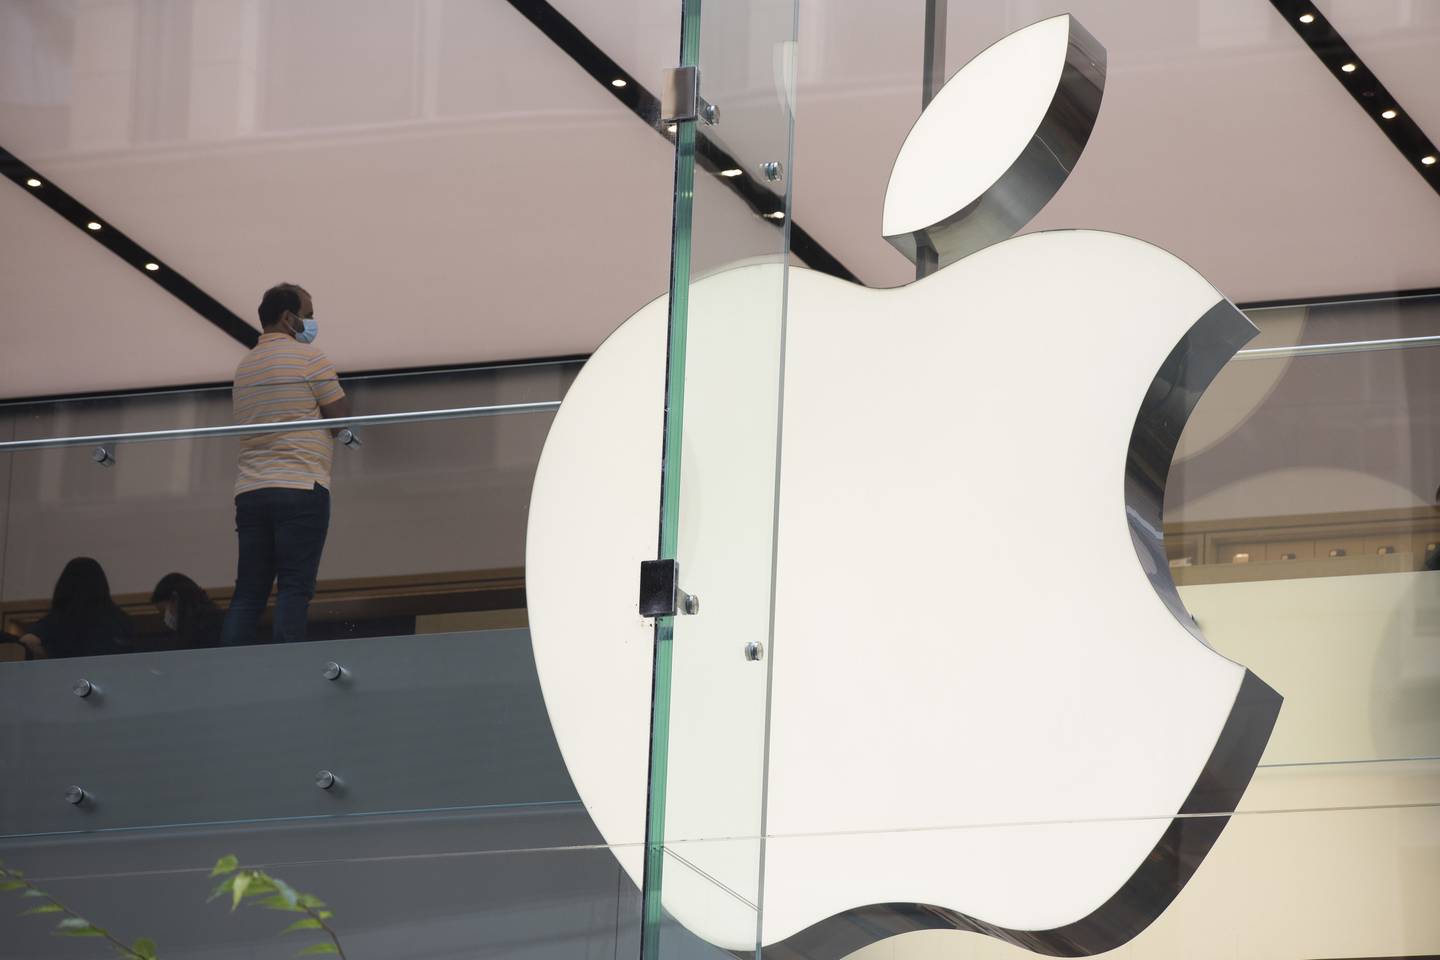 A customer stands near an Apple Inc. logo at a store in Sydney, Australia, on Monday, Feb. 28, 2022. Australia is scheduled to release gross domestic product (GDP) figures on March 2. Photographer: Brent Lewin/Bloombergdfd